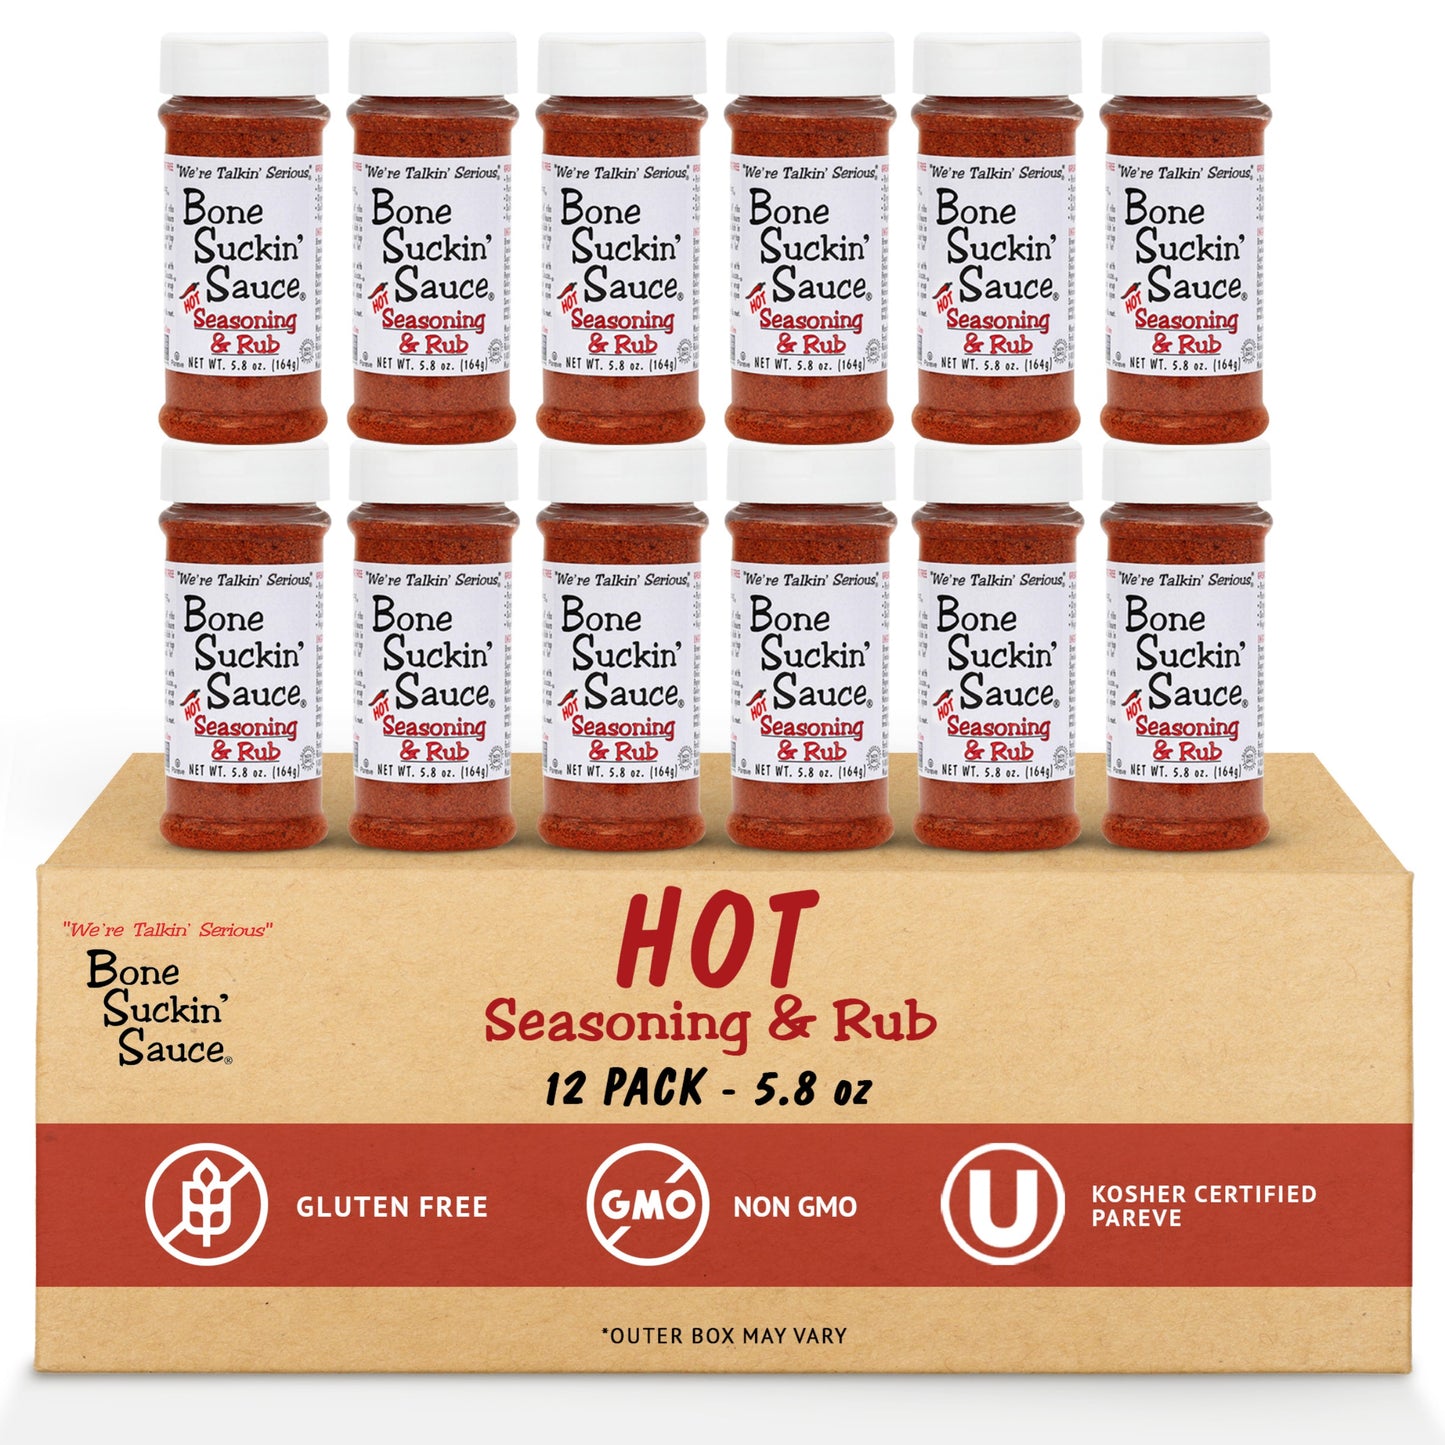 Bone Suckin’® Hot Seasoning & Rub, 5.8 oz. A cayenne kick is the perfect addition to the proprietary blend of brown sugar, paprika, garlic and spices in the original. This perfect combination of spicy, salty and sweet brings just the right amount of heat to this versatile product. Everyone can enjoy that same great flavor with a little extra spice. 12 pack